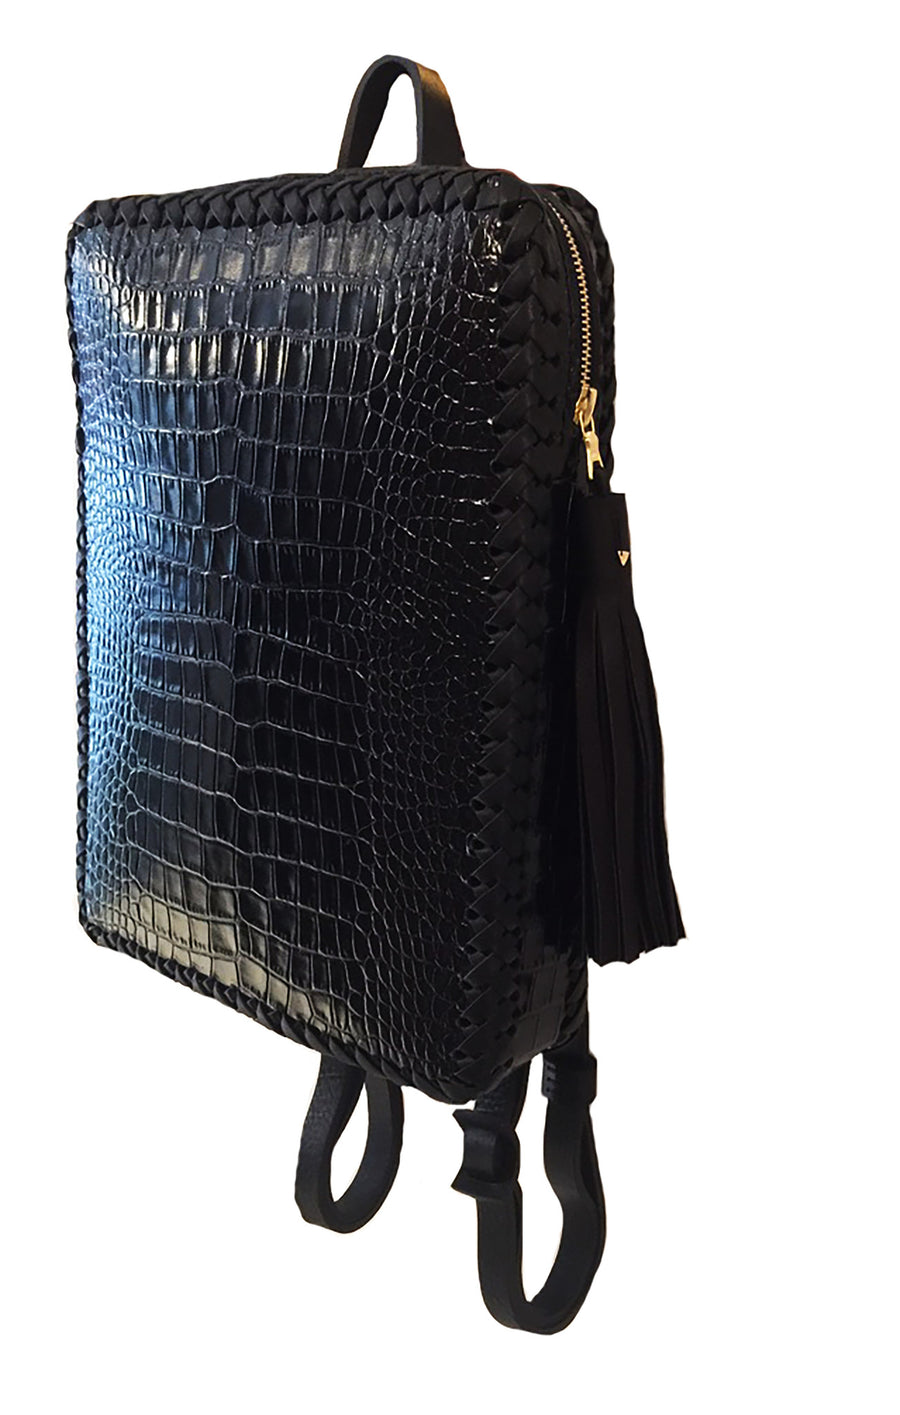 Shiny Reflective Black Embossed Croc Crocodile Alligator Cowhide Leather Folio Backpack Wendy Nichol Handbag Purse Designer Handmade in NYC New York City Rectangle Square Braided Structured Structural French Work School Backpack Fringe Tassel Adjustable Straps Zip Zipper High Quality Leather